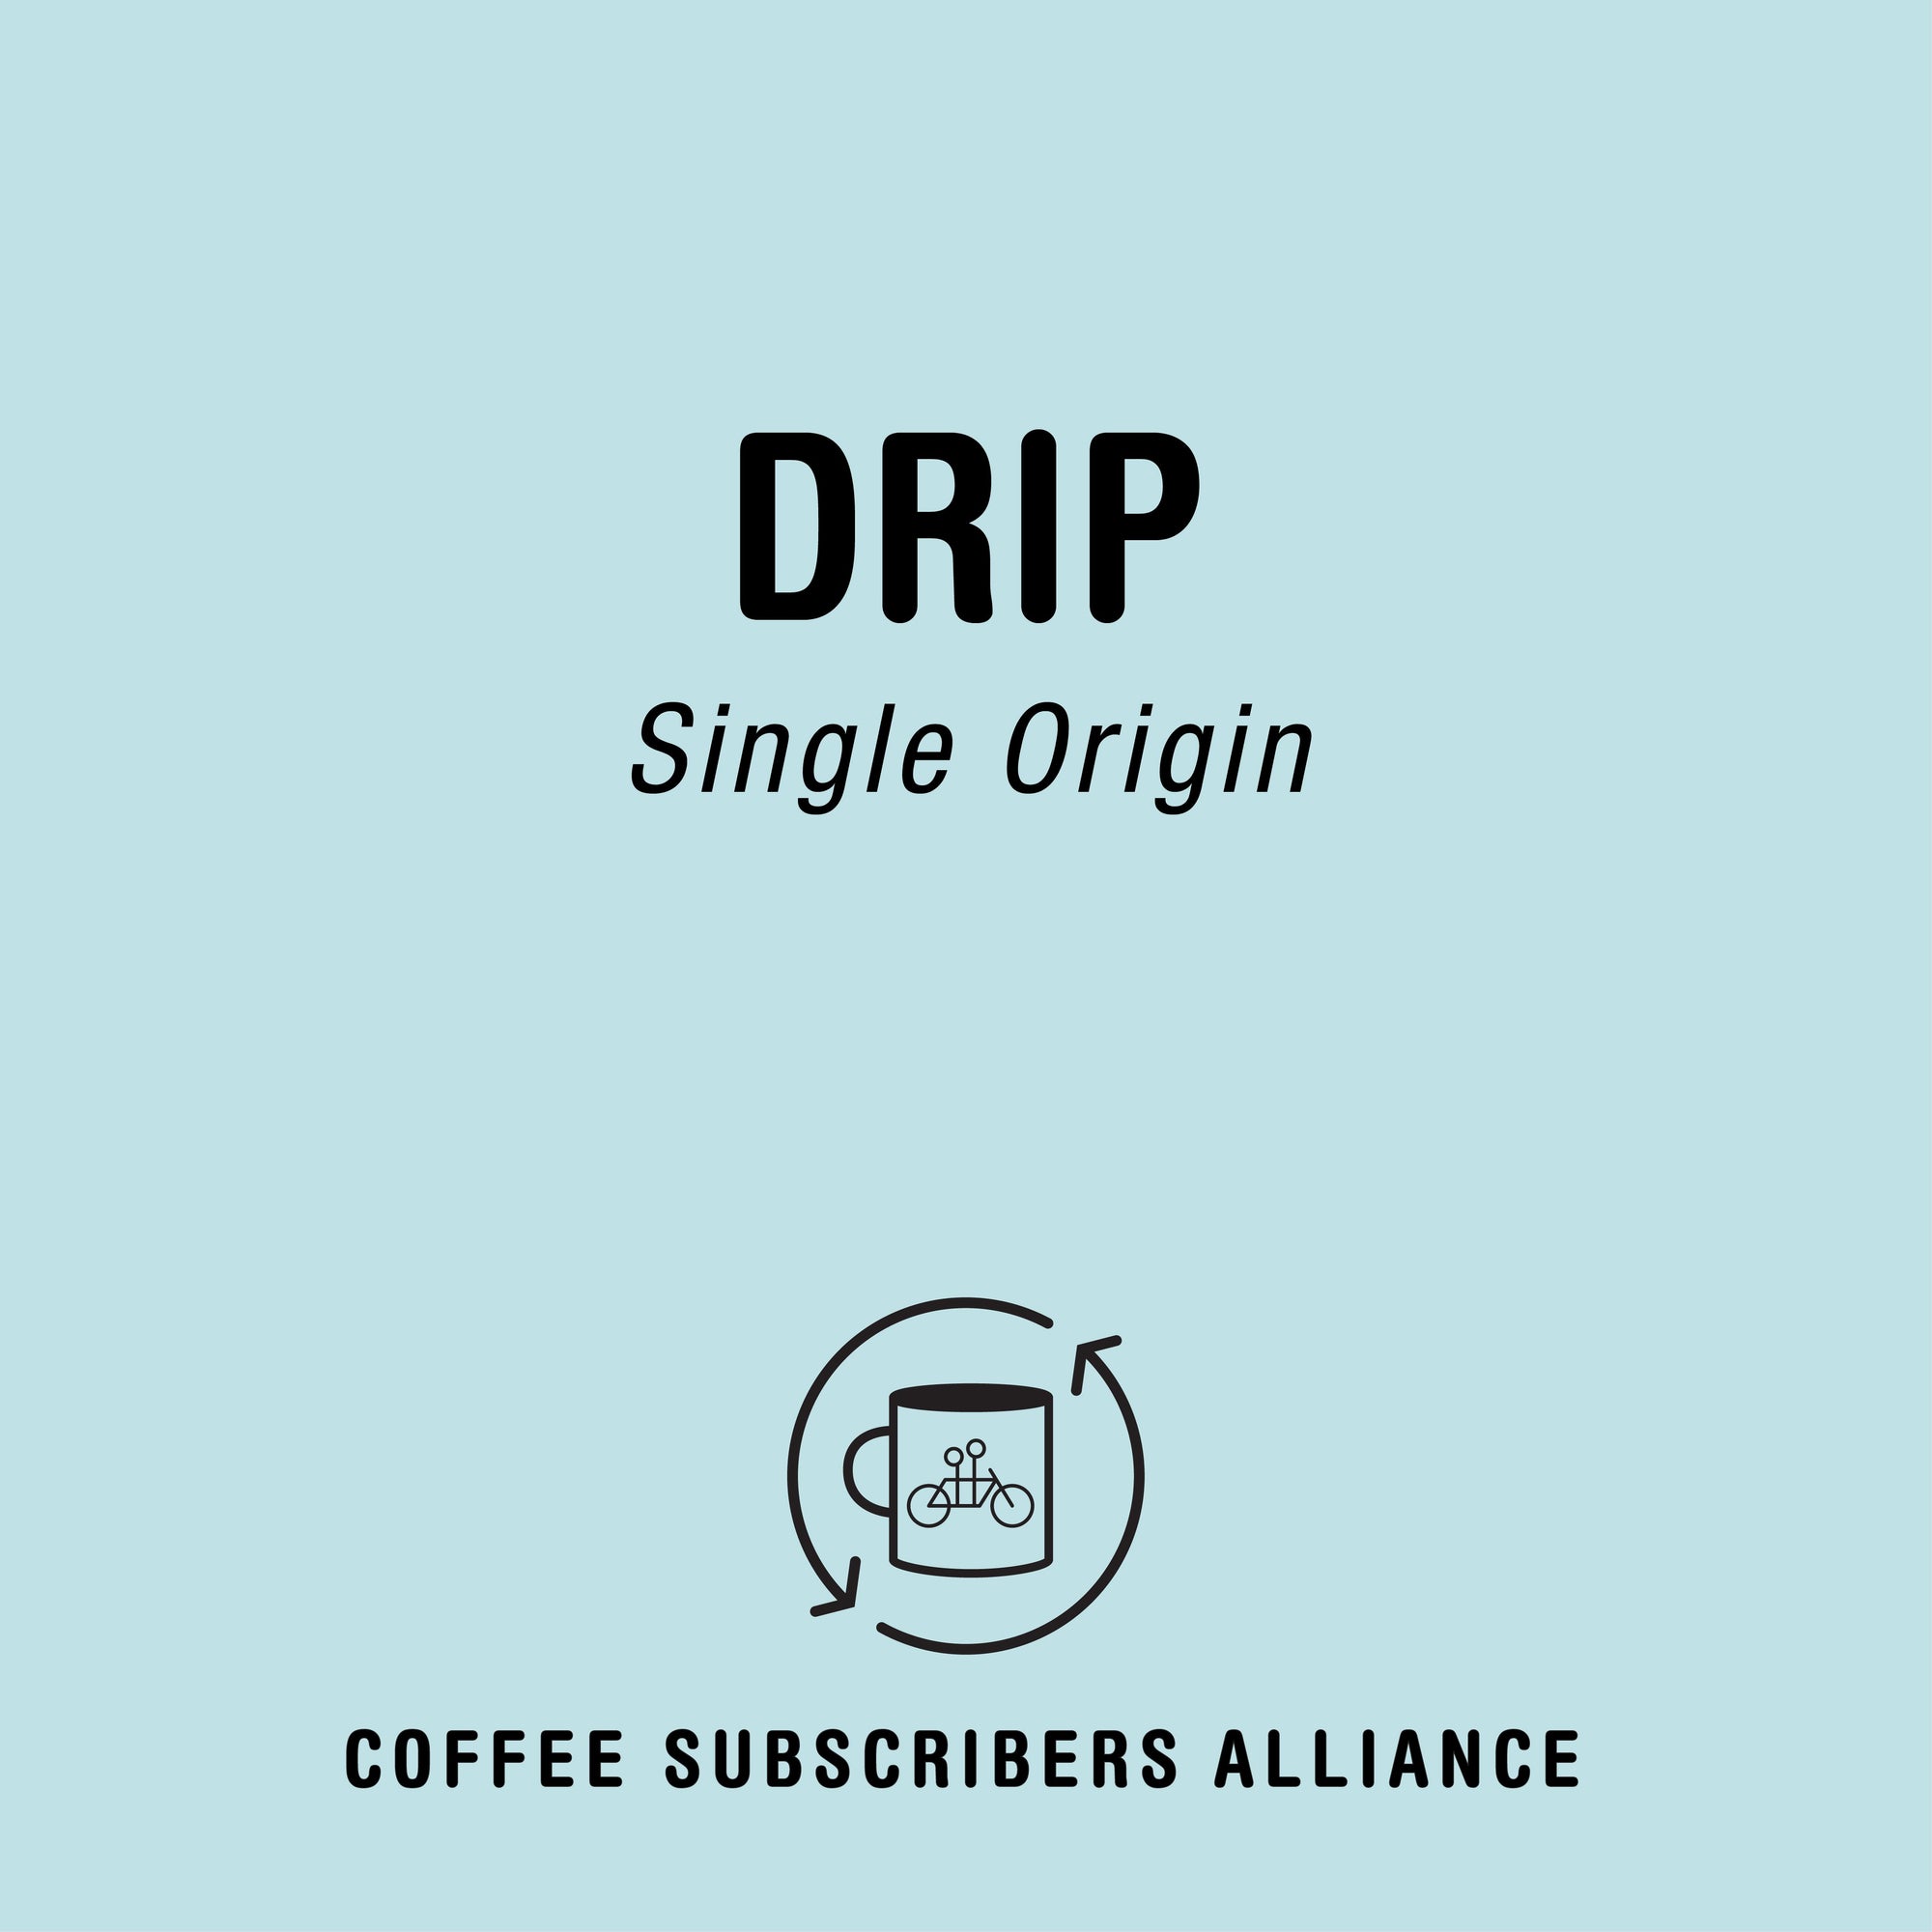 Logo design for Tandem Drip Subscription featuring the words "single origin" and a circular emblem with a coffee cup that has coffee beans symbol above it. The background is plain light blue.